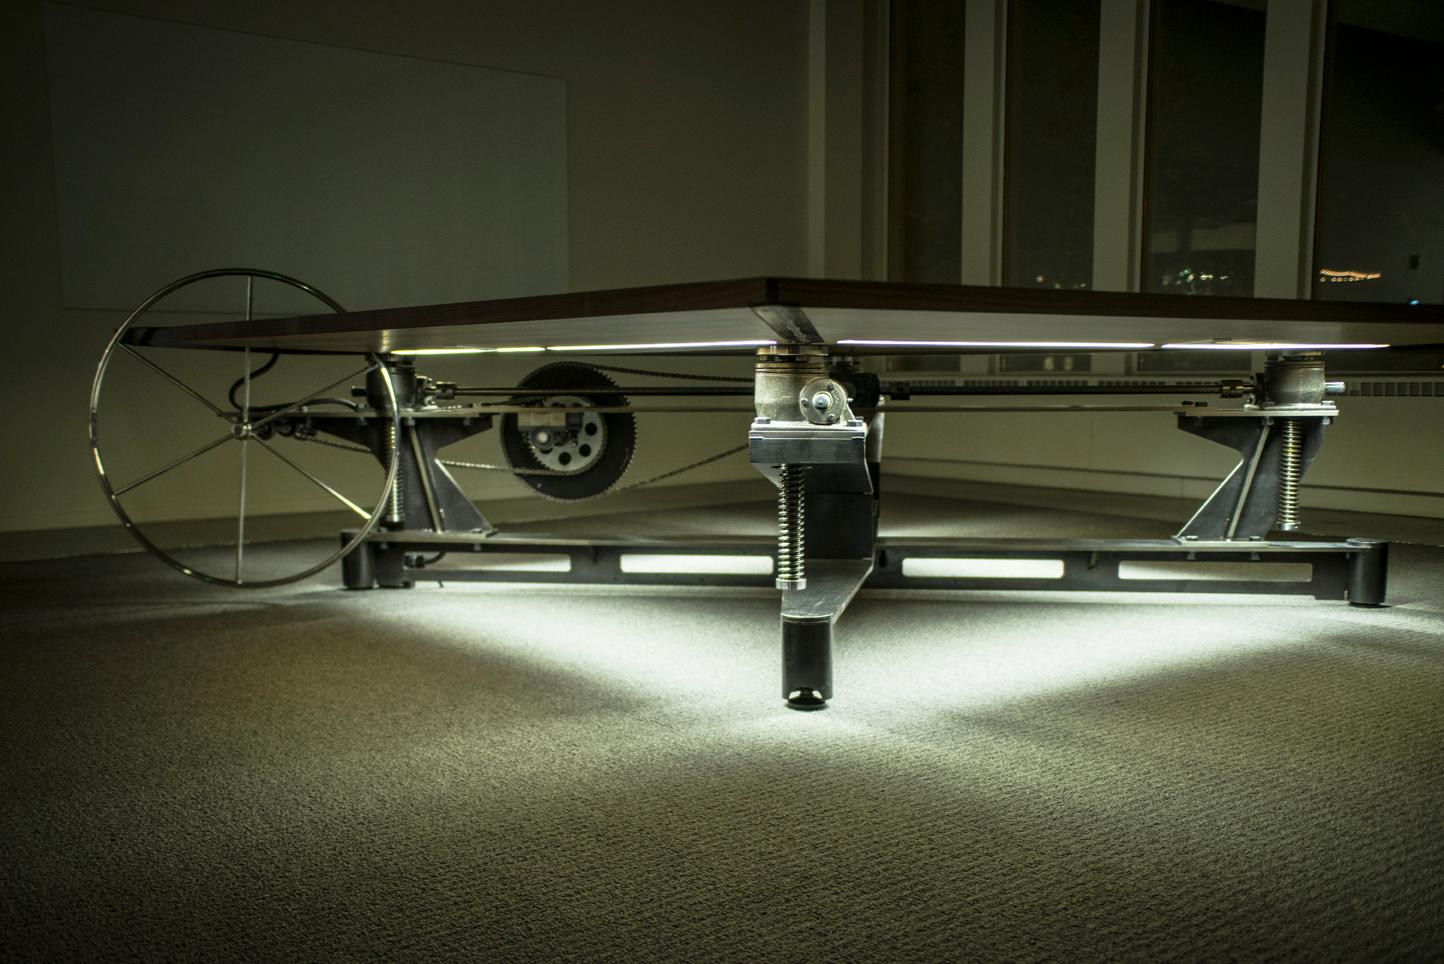 A culmination of steel, wood and glass make for one of the most incredible conference tables ever constructed. This table features under lighting and power outlets under each wing of the table. These features can be optimized per your requirements.